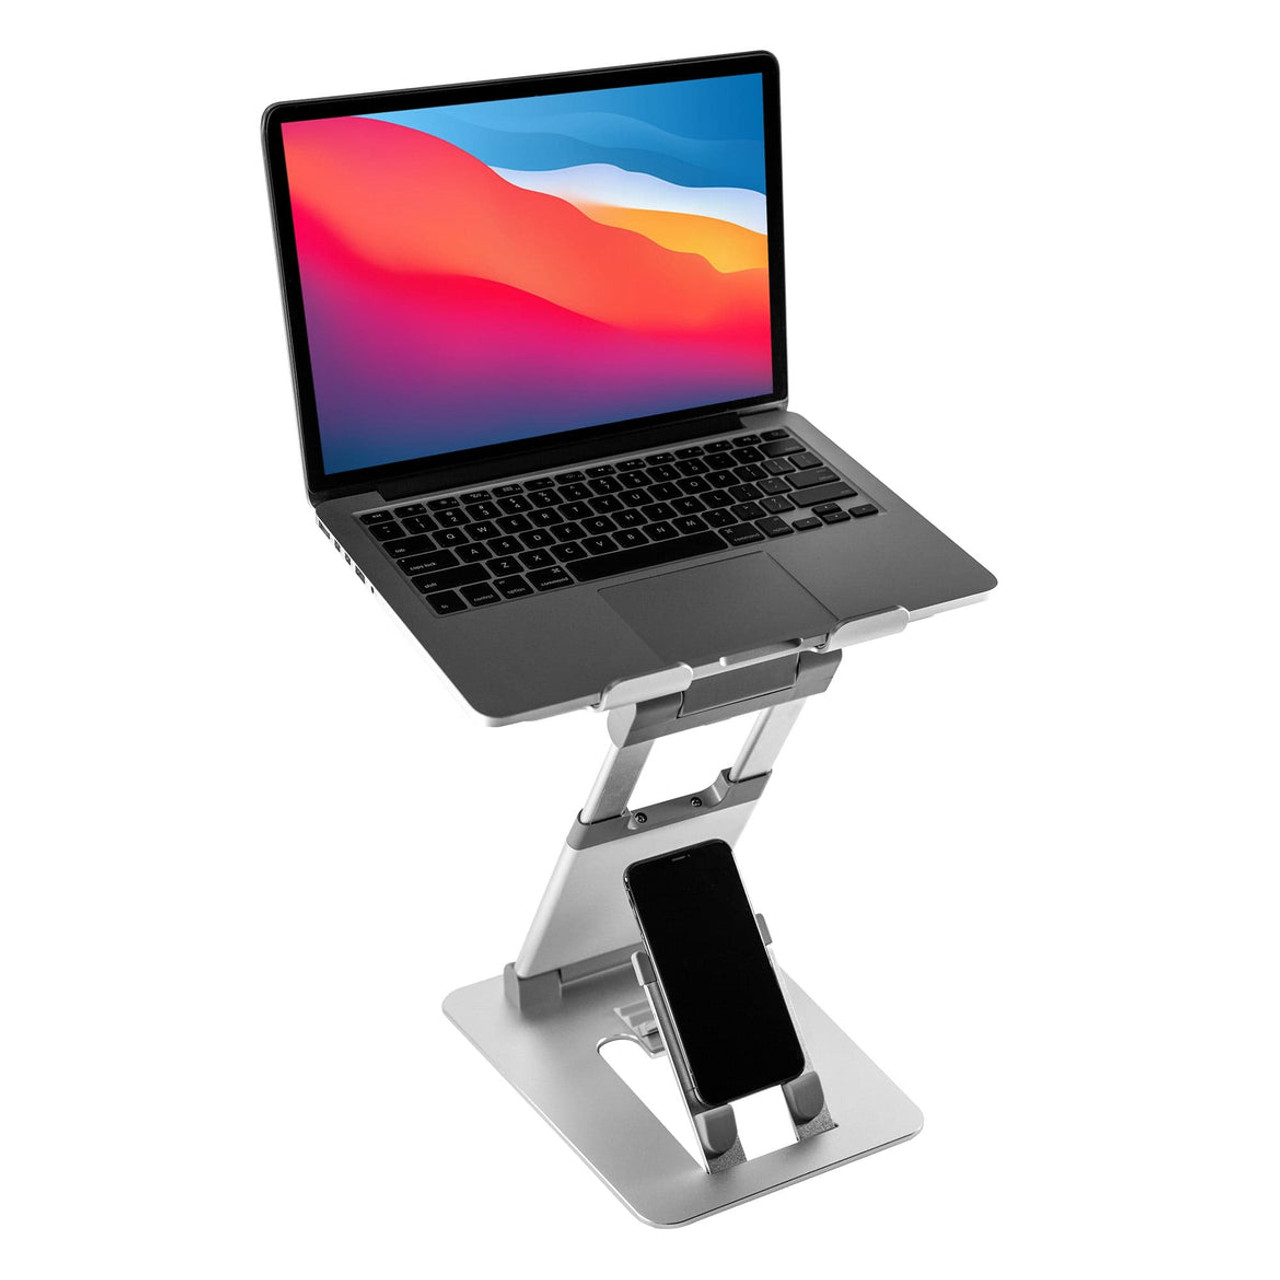 Goldtouch Go! Travel Laptop and Tablet Stand (Aluminum) - KOV-GTLS